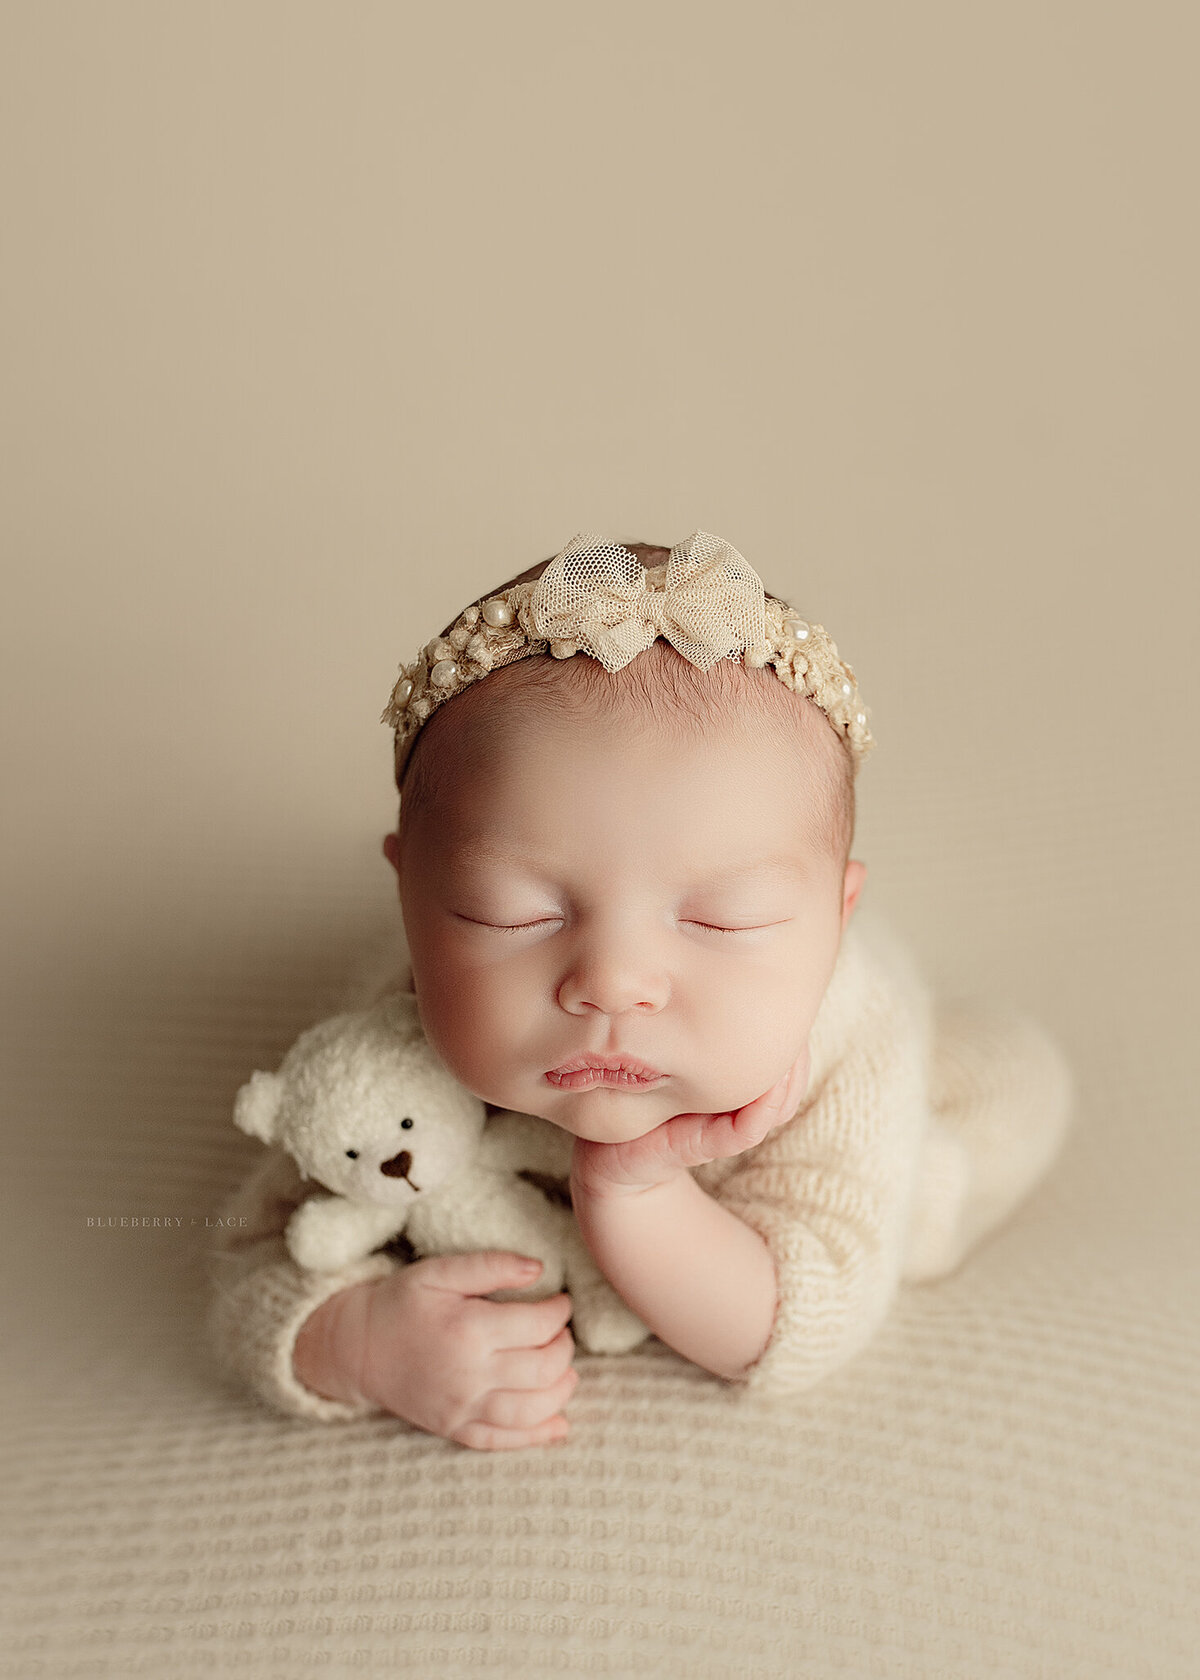 photo session with newborn baby girl in studio serving Syracuse ny, and surrounding areas